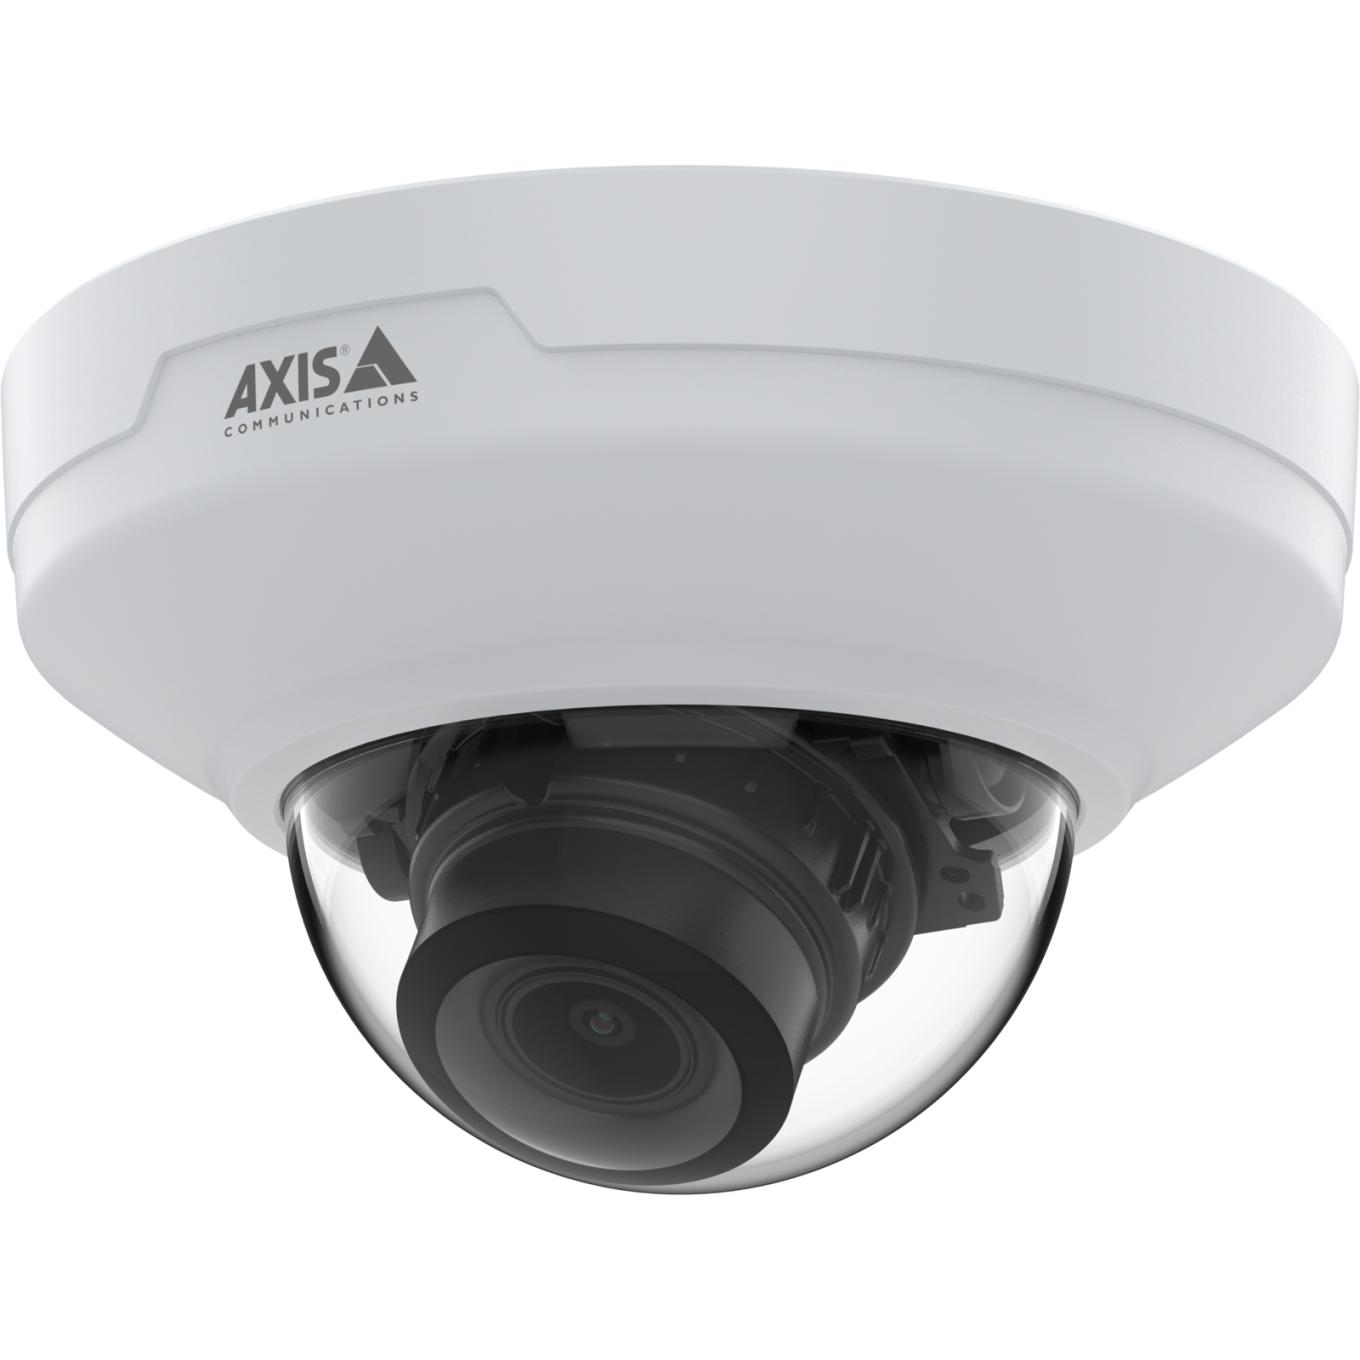 AXIS M4216-V Dome Camera, ceiling, viewed from its left angle